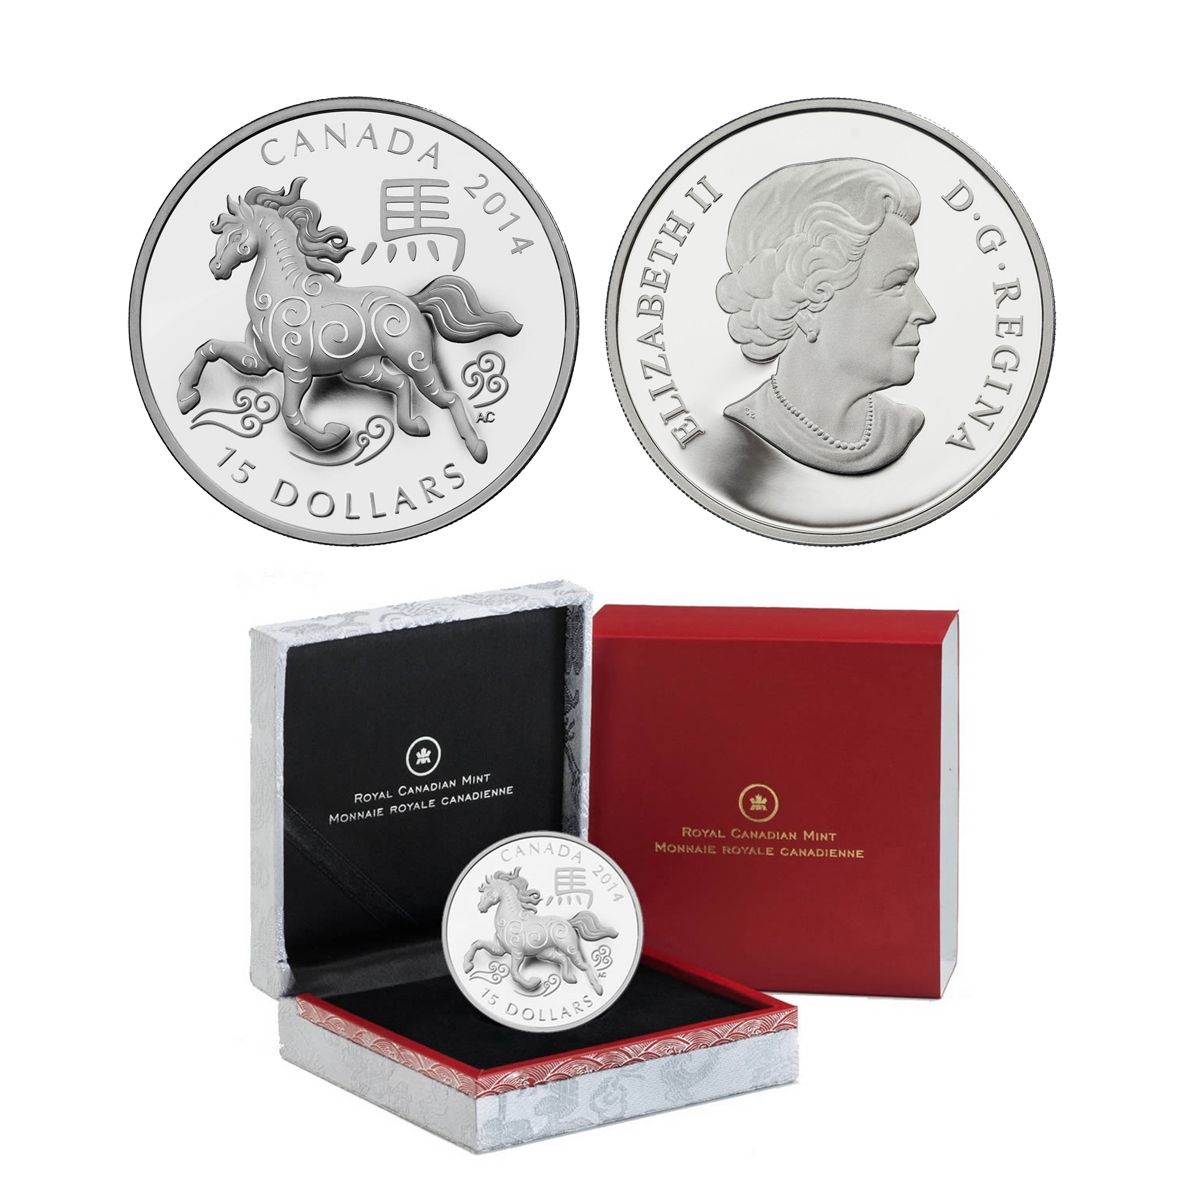 Canada 2014 $15 Year of the Horse 99.99% Pure Silver Lunar Lotus Proof Coin 